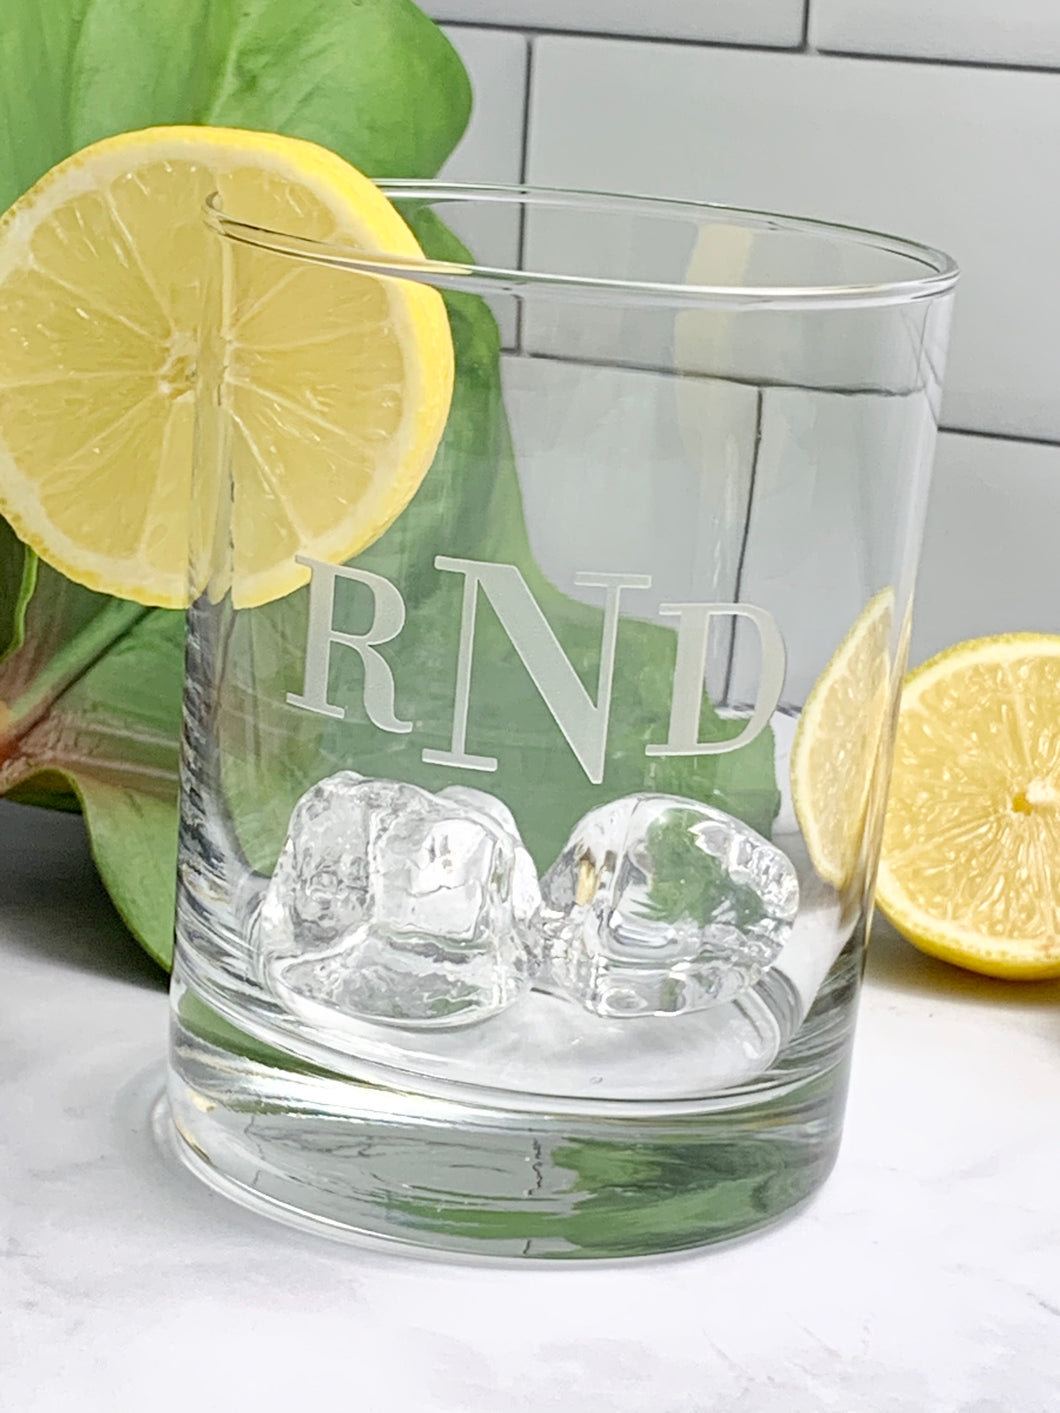 Double Old Fashioned Rocks Glass with Etched Monogram, 14 oz